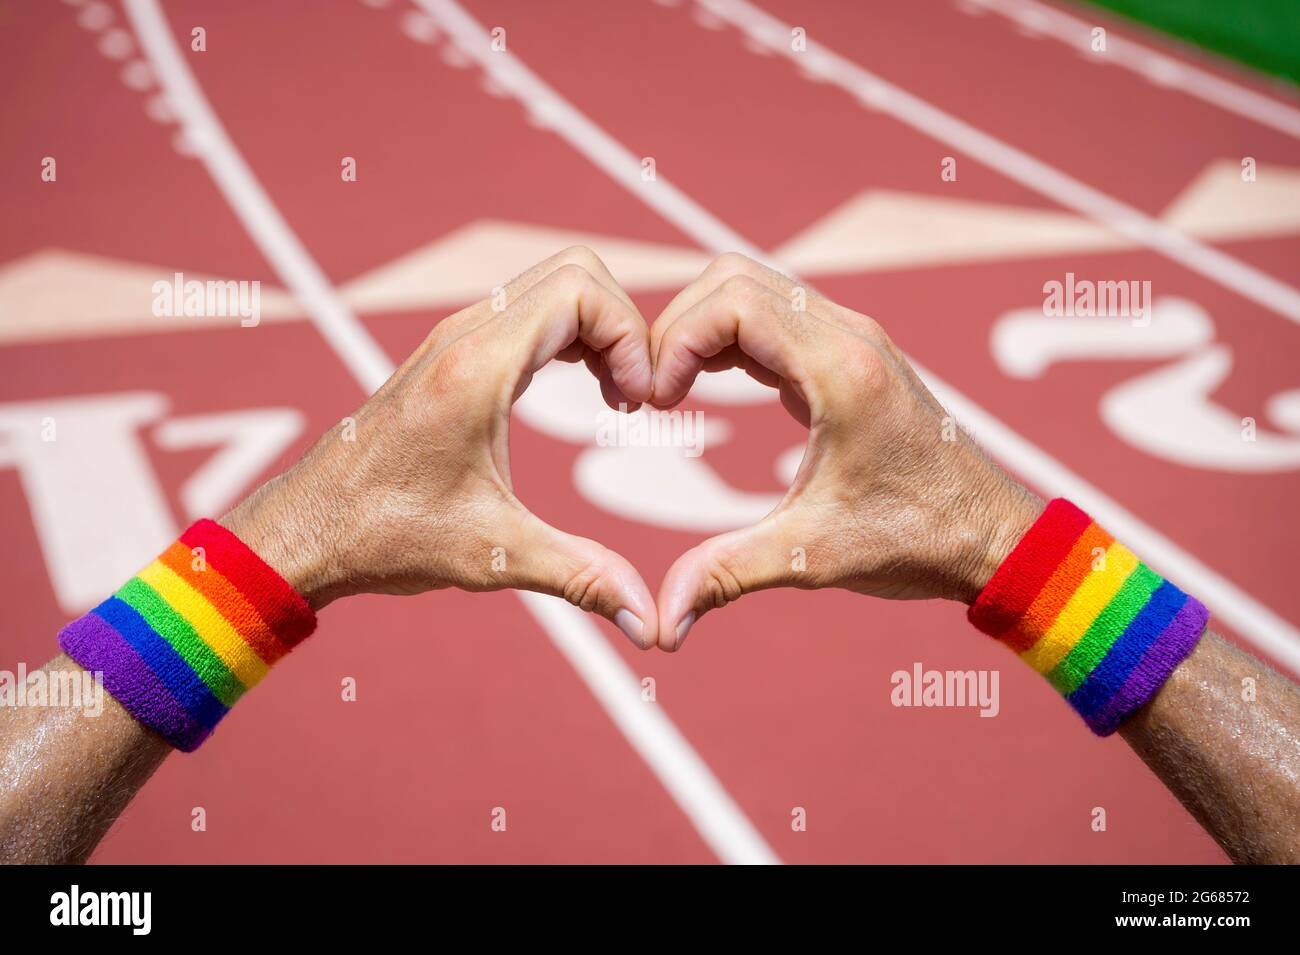 Gay athlete wearing rainbow pride wristbands making love heart hands gesture against a red athletic track background Stock Photo